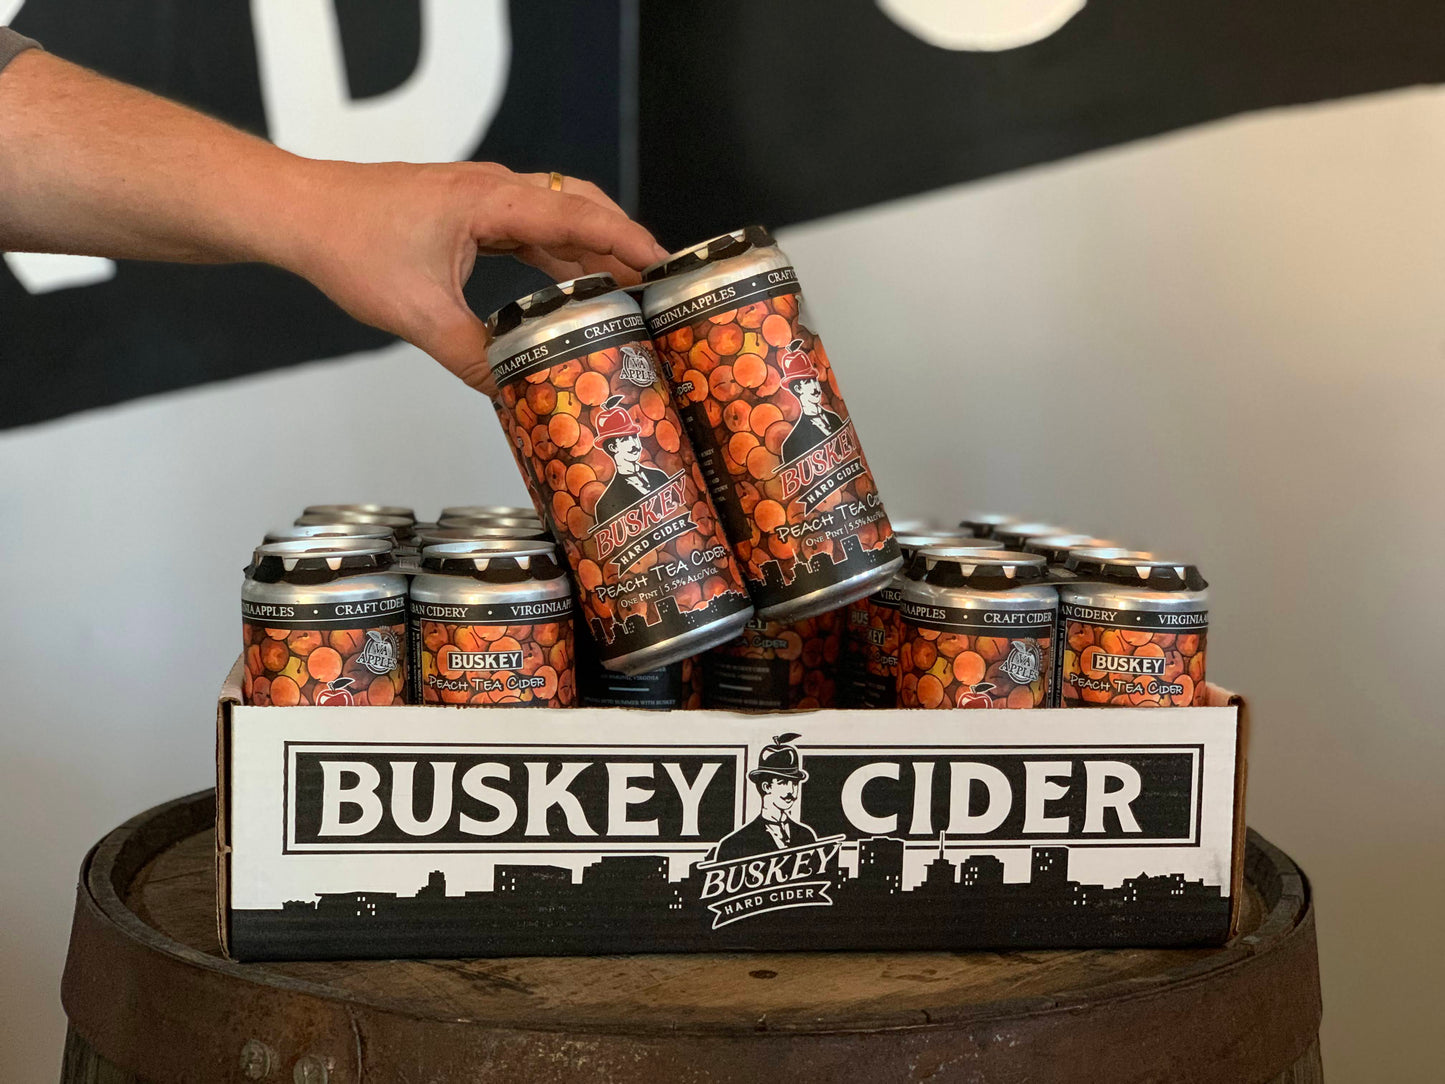 Buskey Peach Tea Cider (4-Pack or Case)